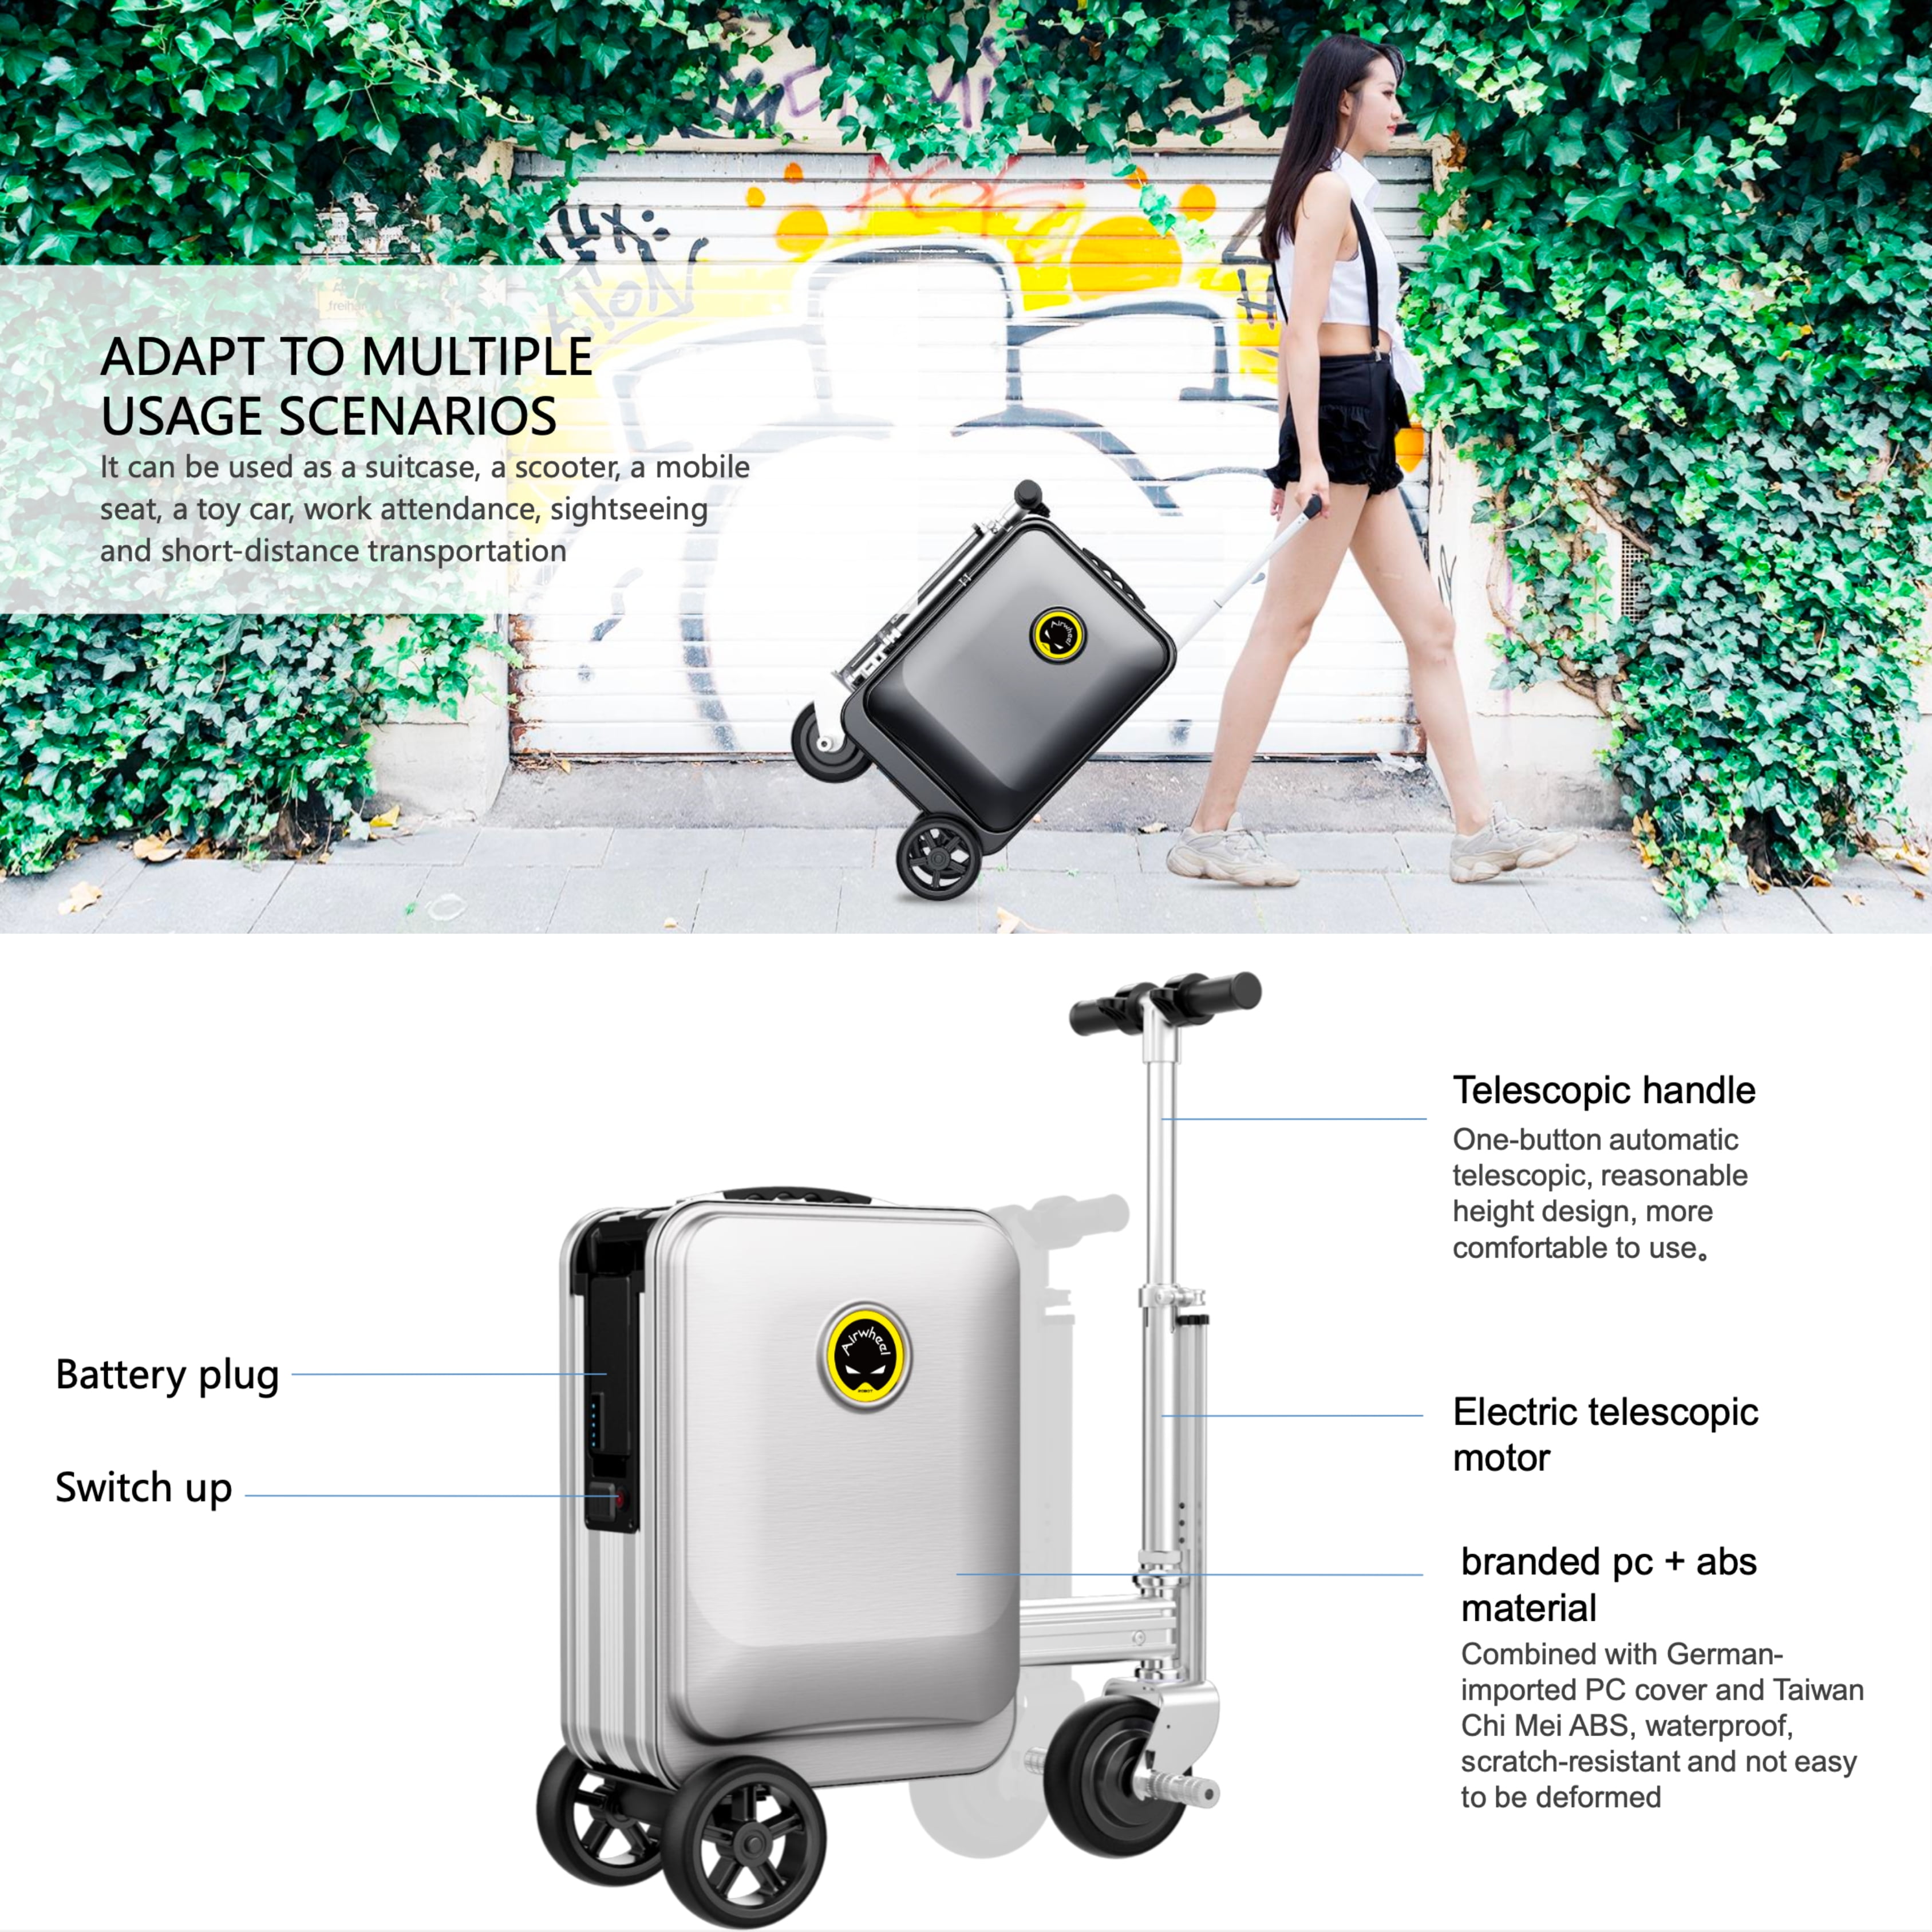 Airwheel SE3S Electric Mini Smart Silver Scooter Luggage 20 Inch Riding  Suitcase